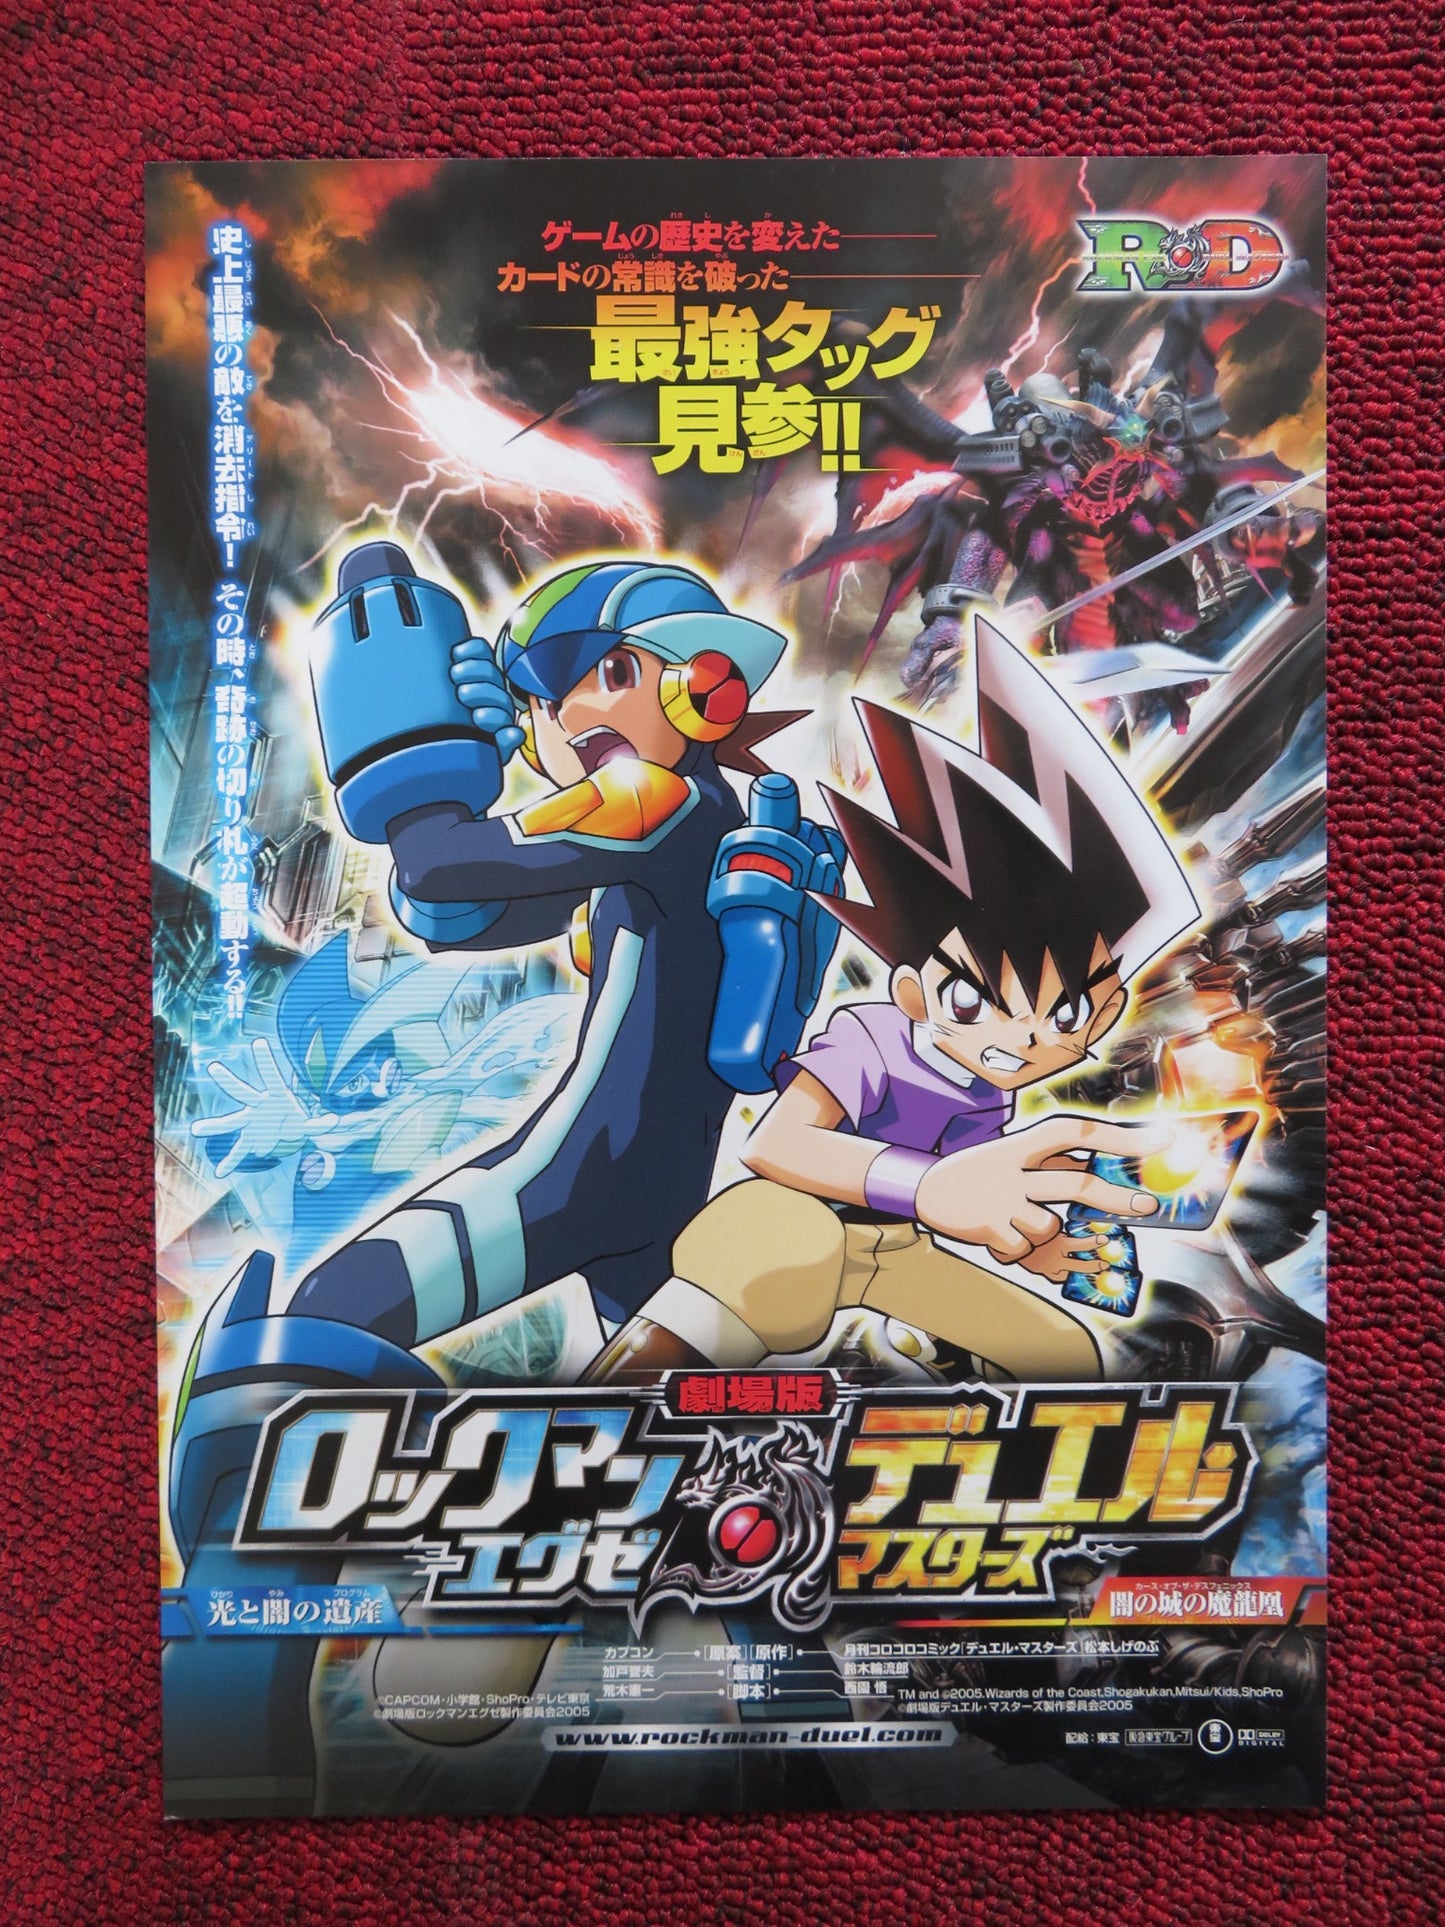 ROCKMAN EXE: THE PROGRAM OF LIGHT AND DARKNESS JAPANESE CHIRASHI (B5) POSTER '05